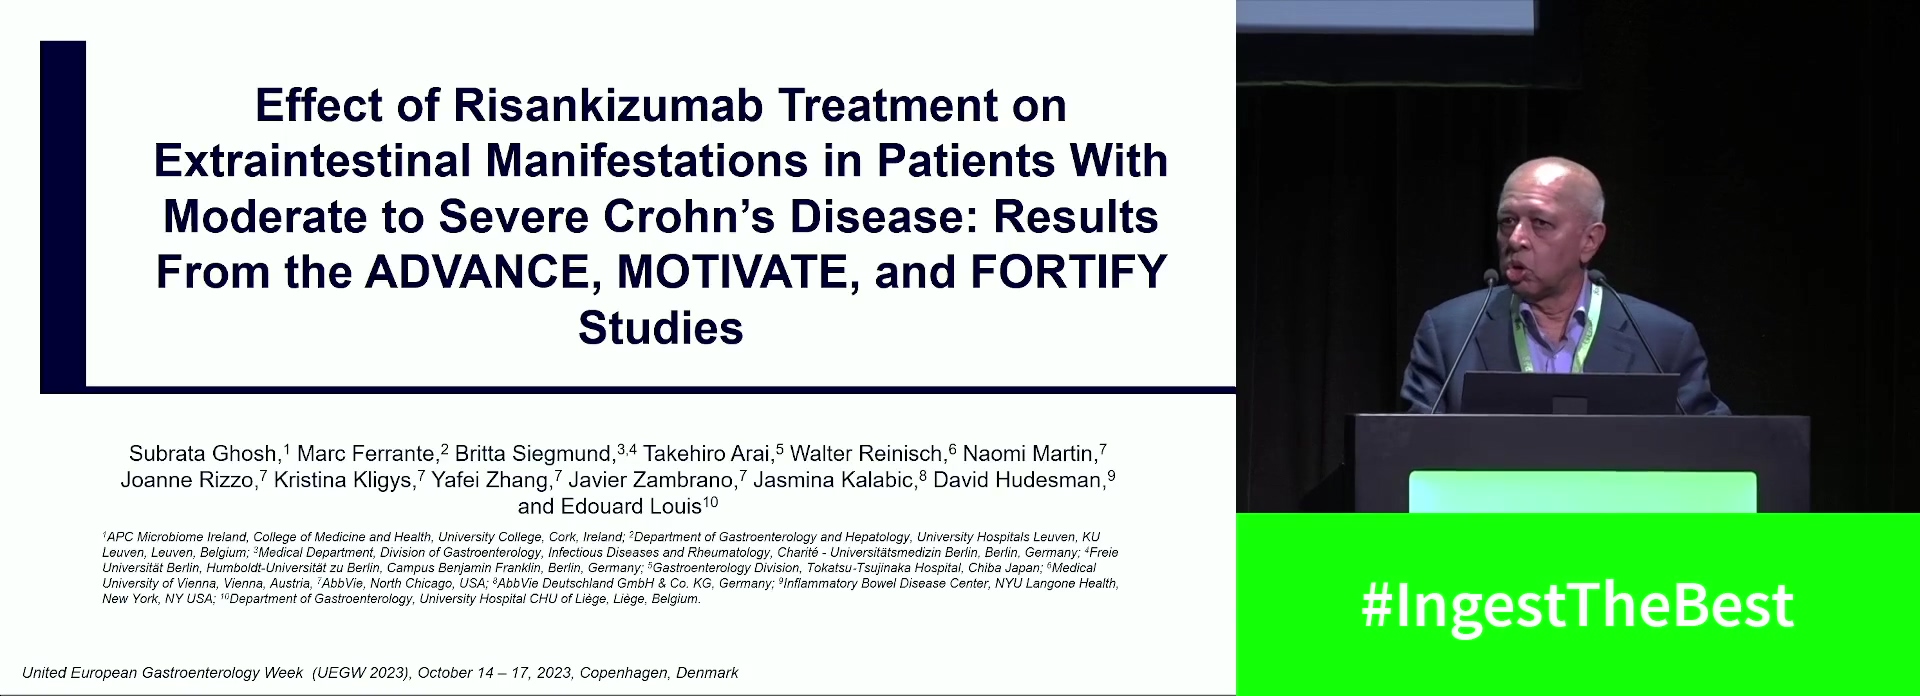 EFFECT OF RISANKIZUMAB TREATMENT ON EXTRAINTESTINAL MANIFESTATIONS (EIMS) IN PATIENTS WITH MODERATE TO SEVERE CROHN’S DISEASE (CD): RESULTS FROM THE ADVANCE, MOTIVATE AND FORTIFY STUDIES